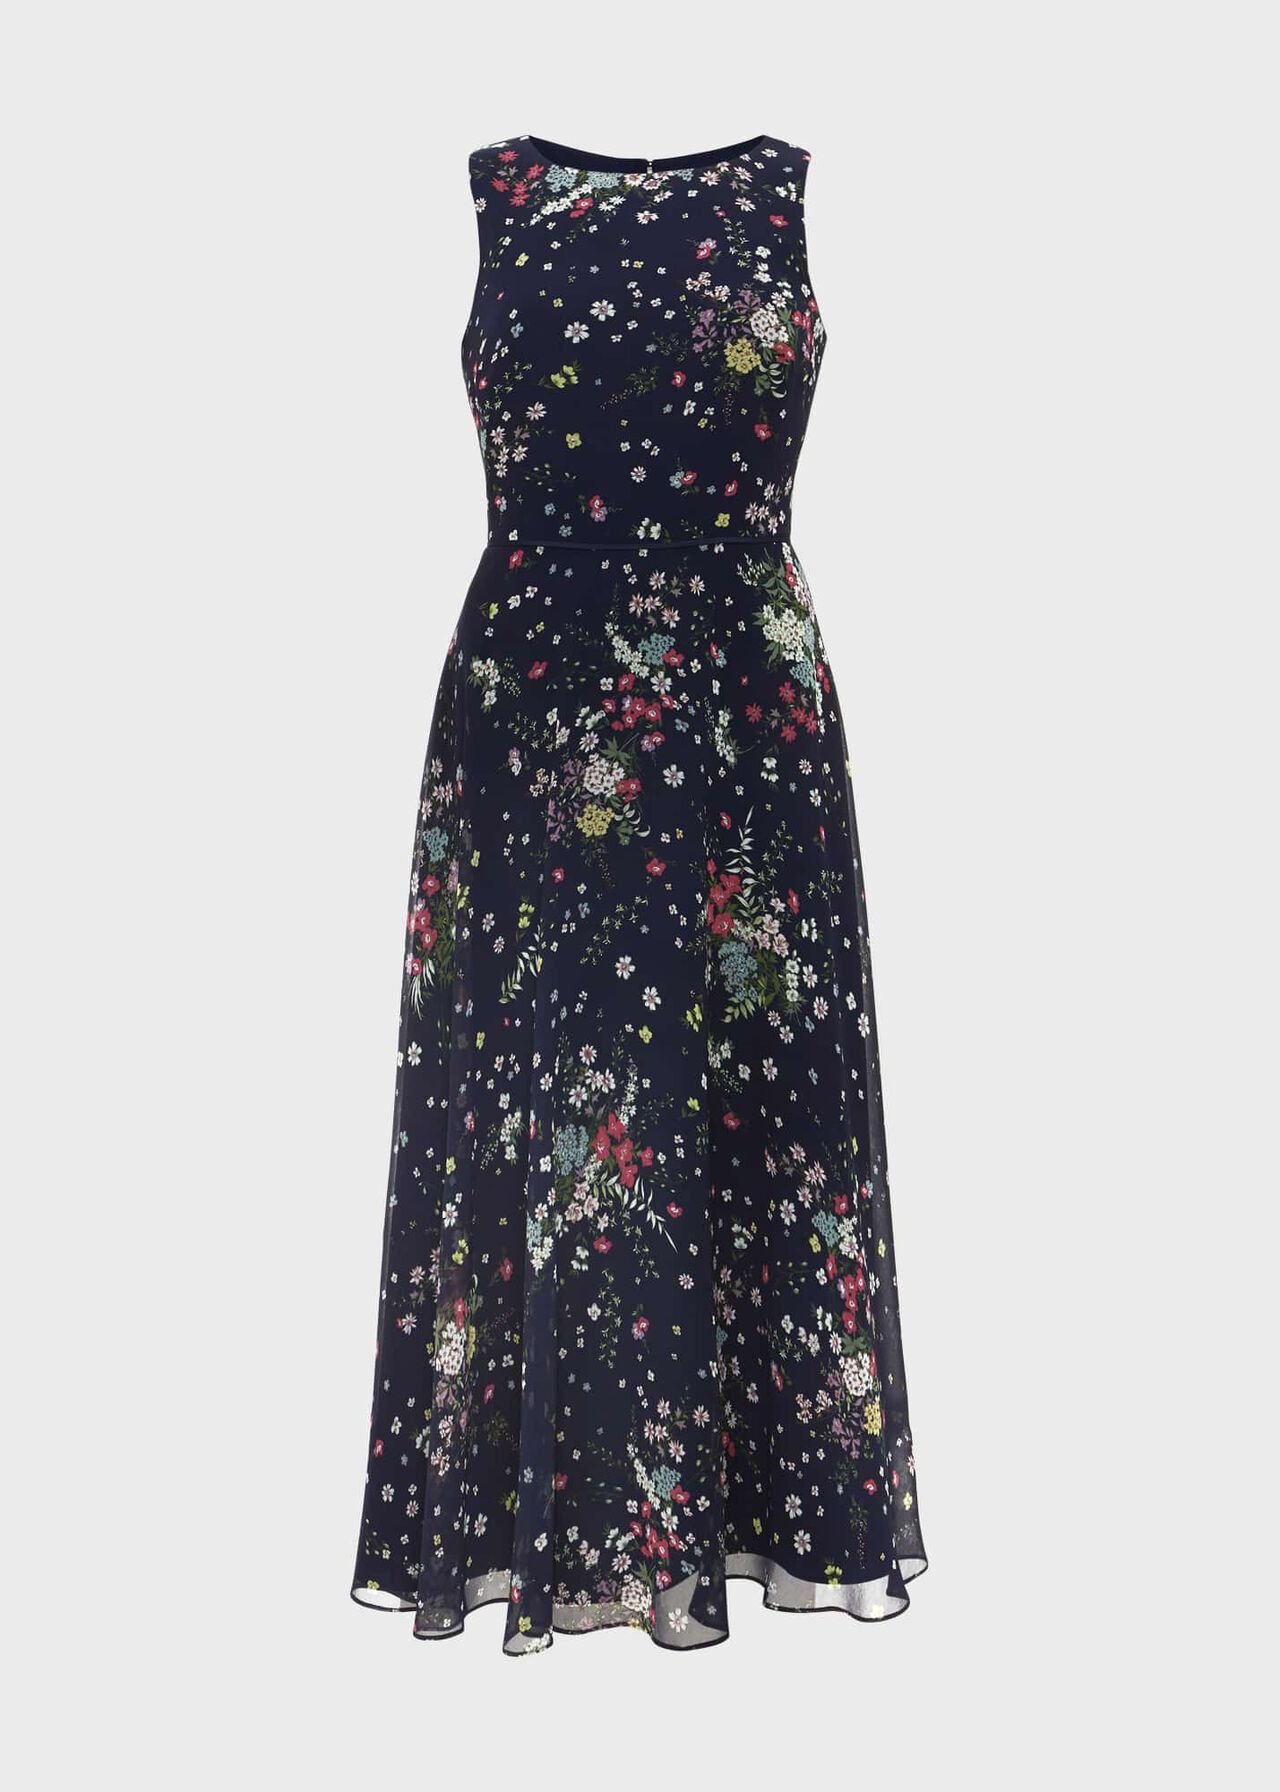 Petite Carly Floral Fit And Flare Dress, Navy Multi, hi-res